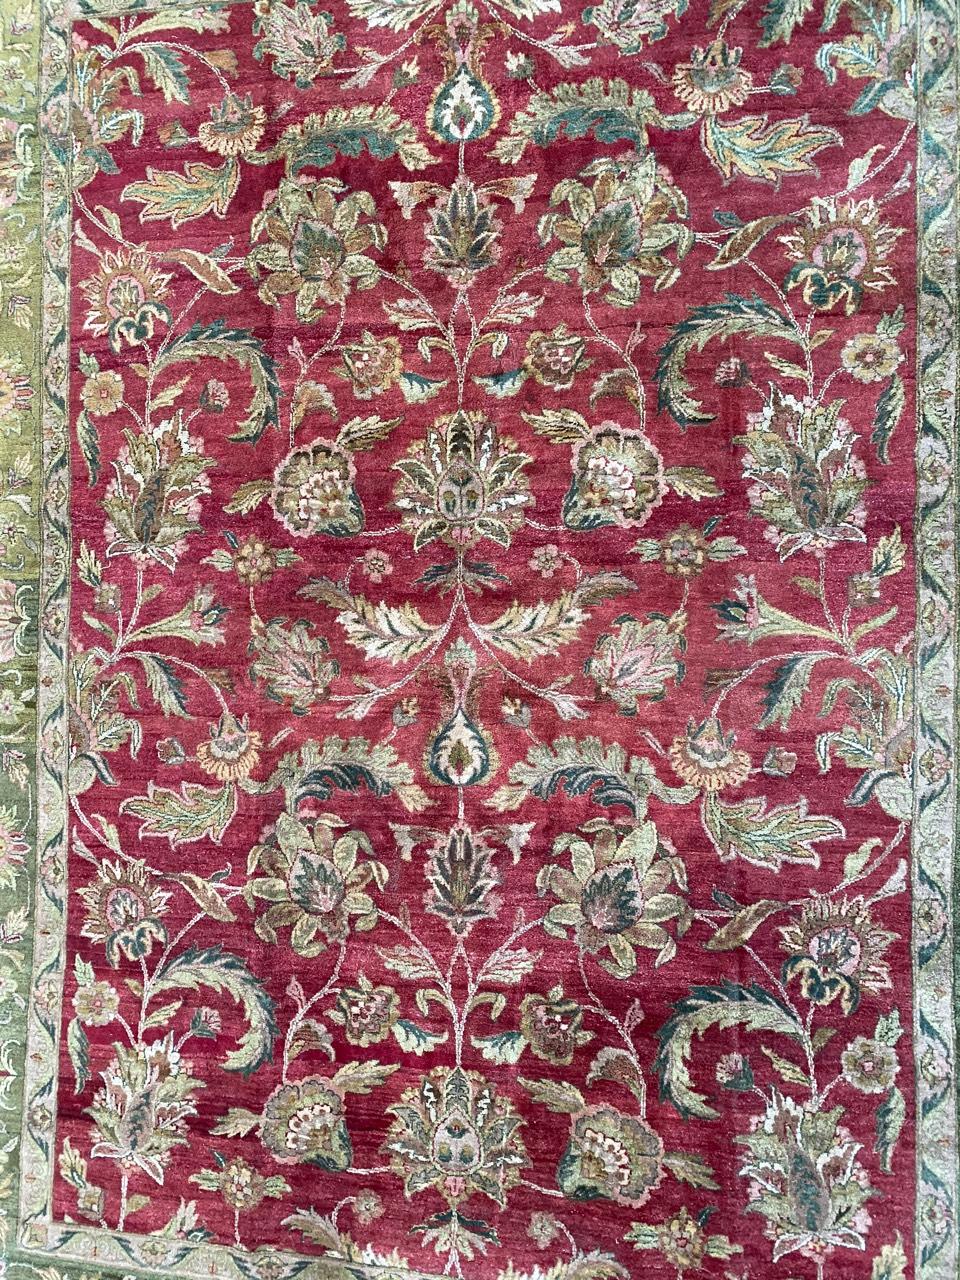 Very beautiful large Indian Agra rug with nice decorative design and beautiful colors with red and green, entirely hand knotted with wool velvet on cotton foundation.